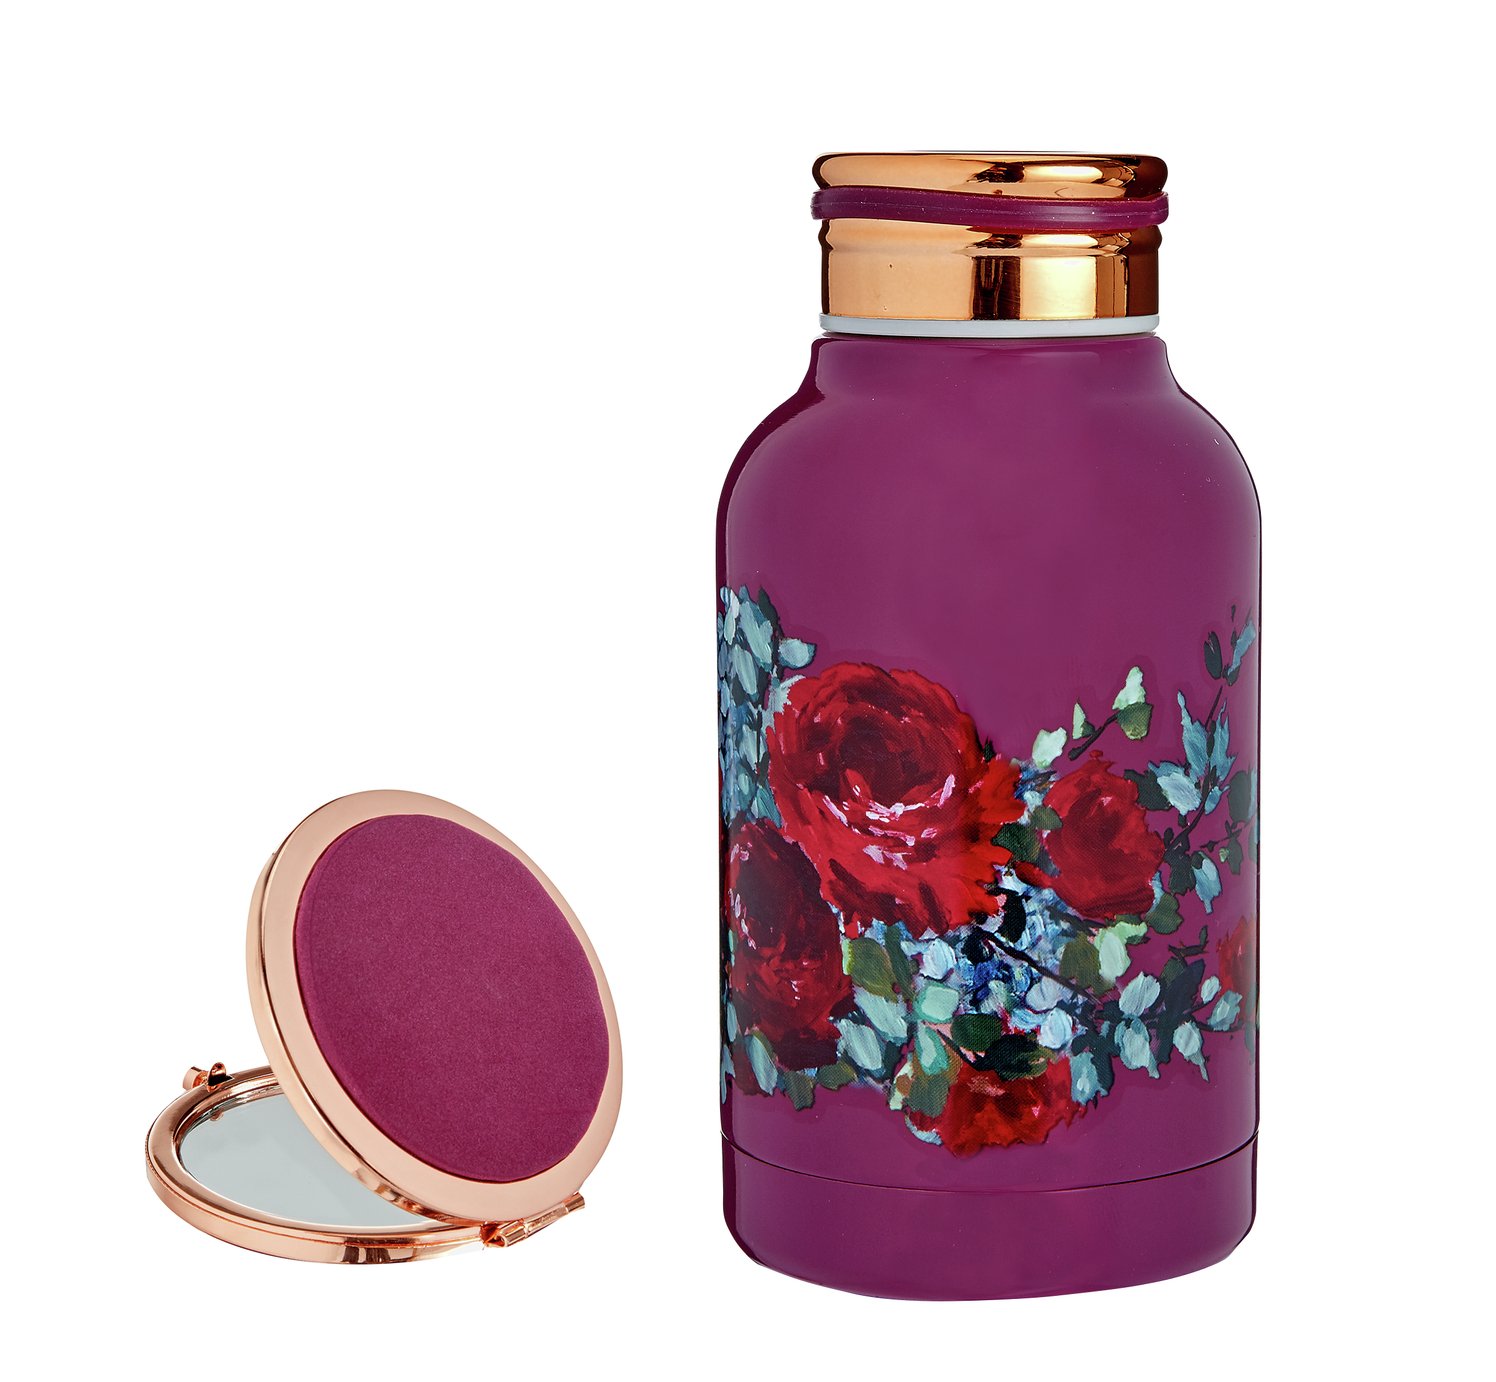 Tranquil Retreat Small Drinks Bottle & Compact Mirror